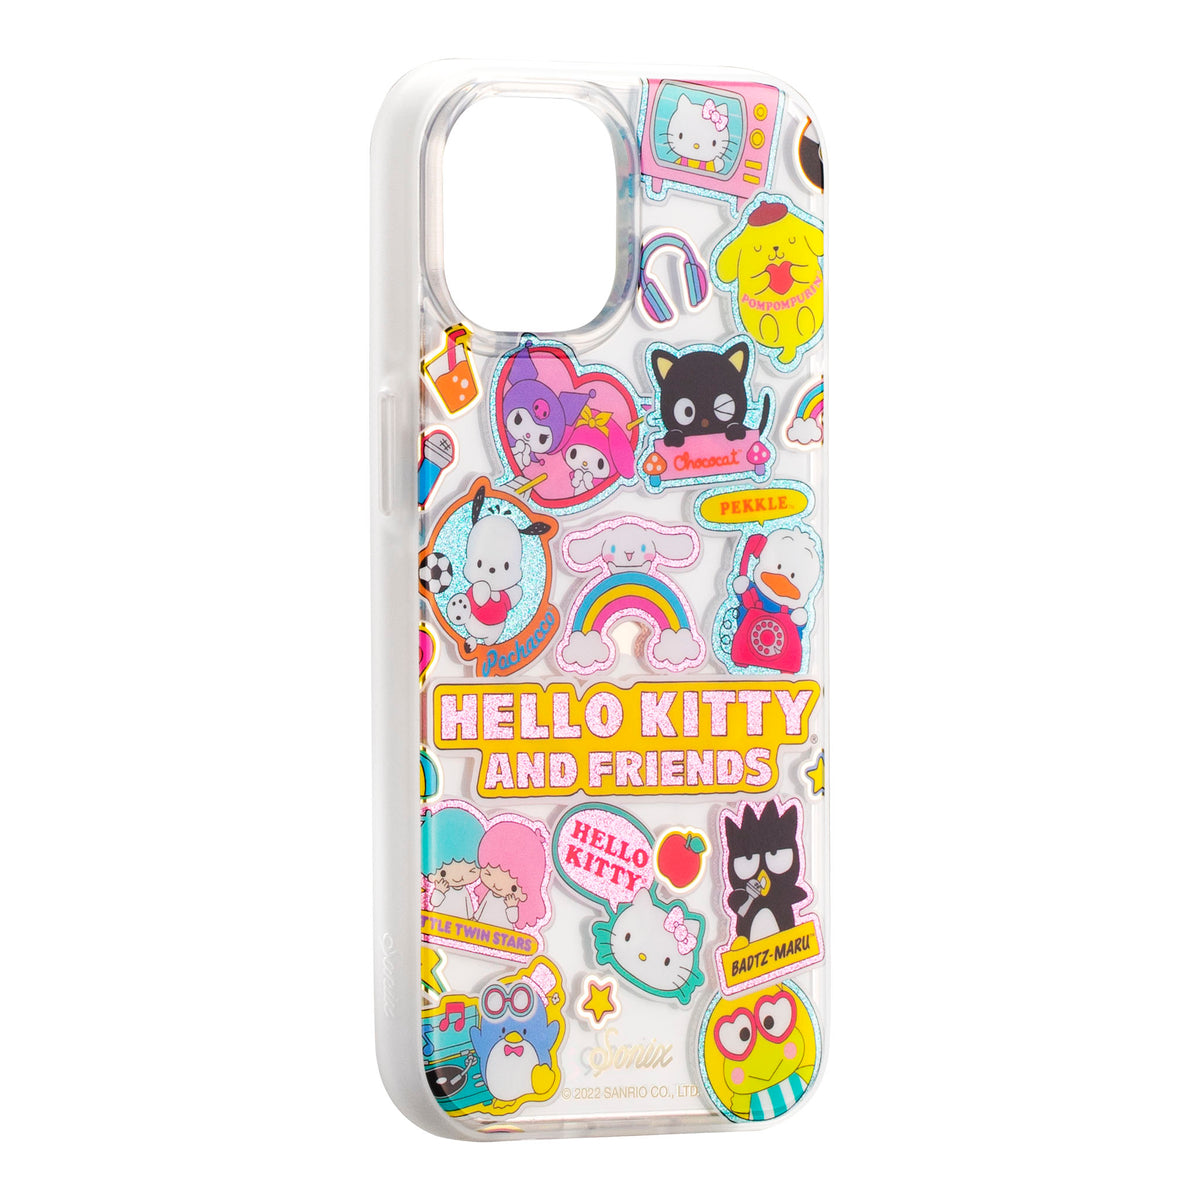 Hello Kitty and Friends x Sonix Stickers iPhone Case Accessory BySonix Inc.   